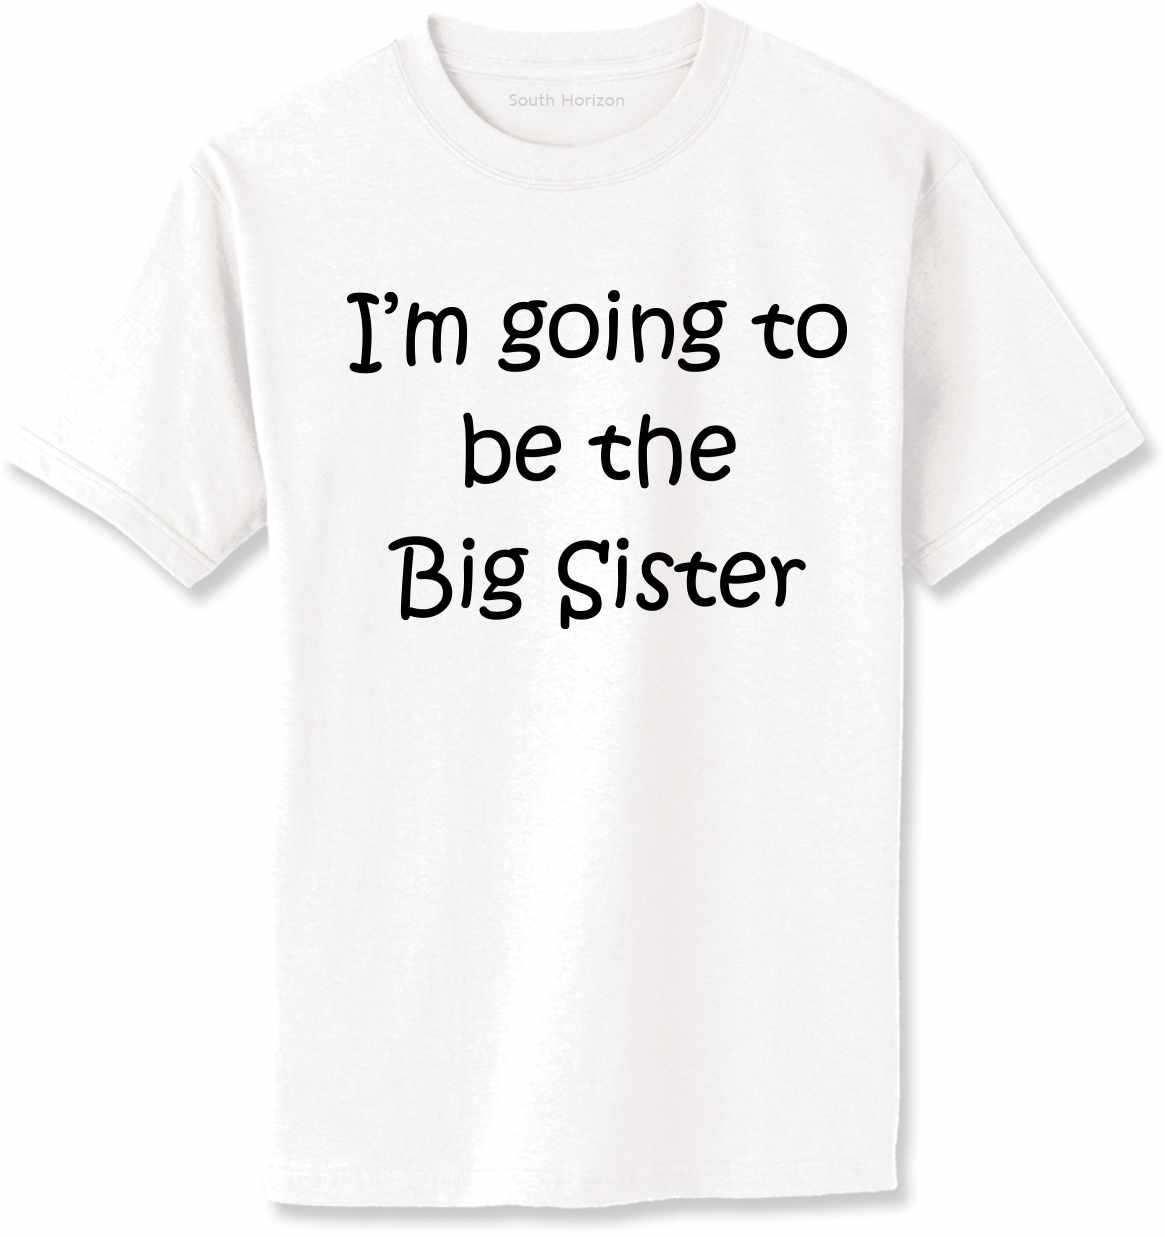 I'M GOING TO BE THE BIG SISTER Adult T-Shirt (#578-1)